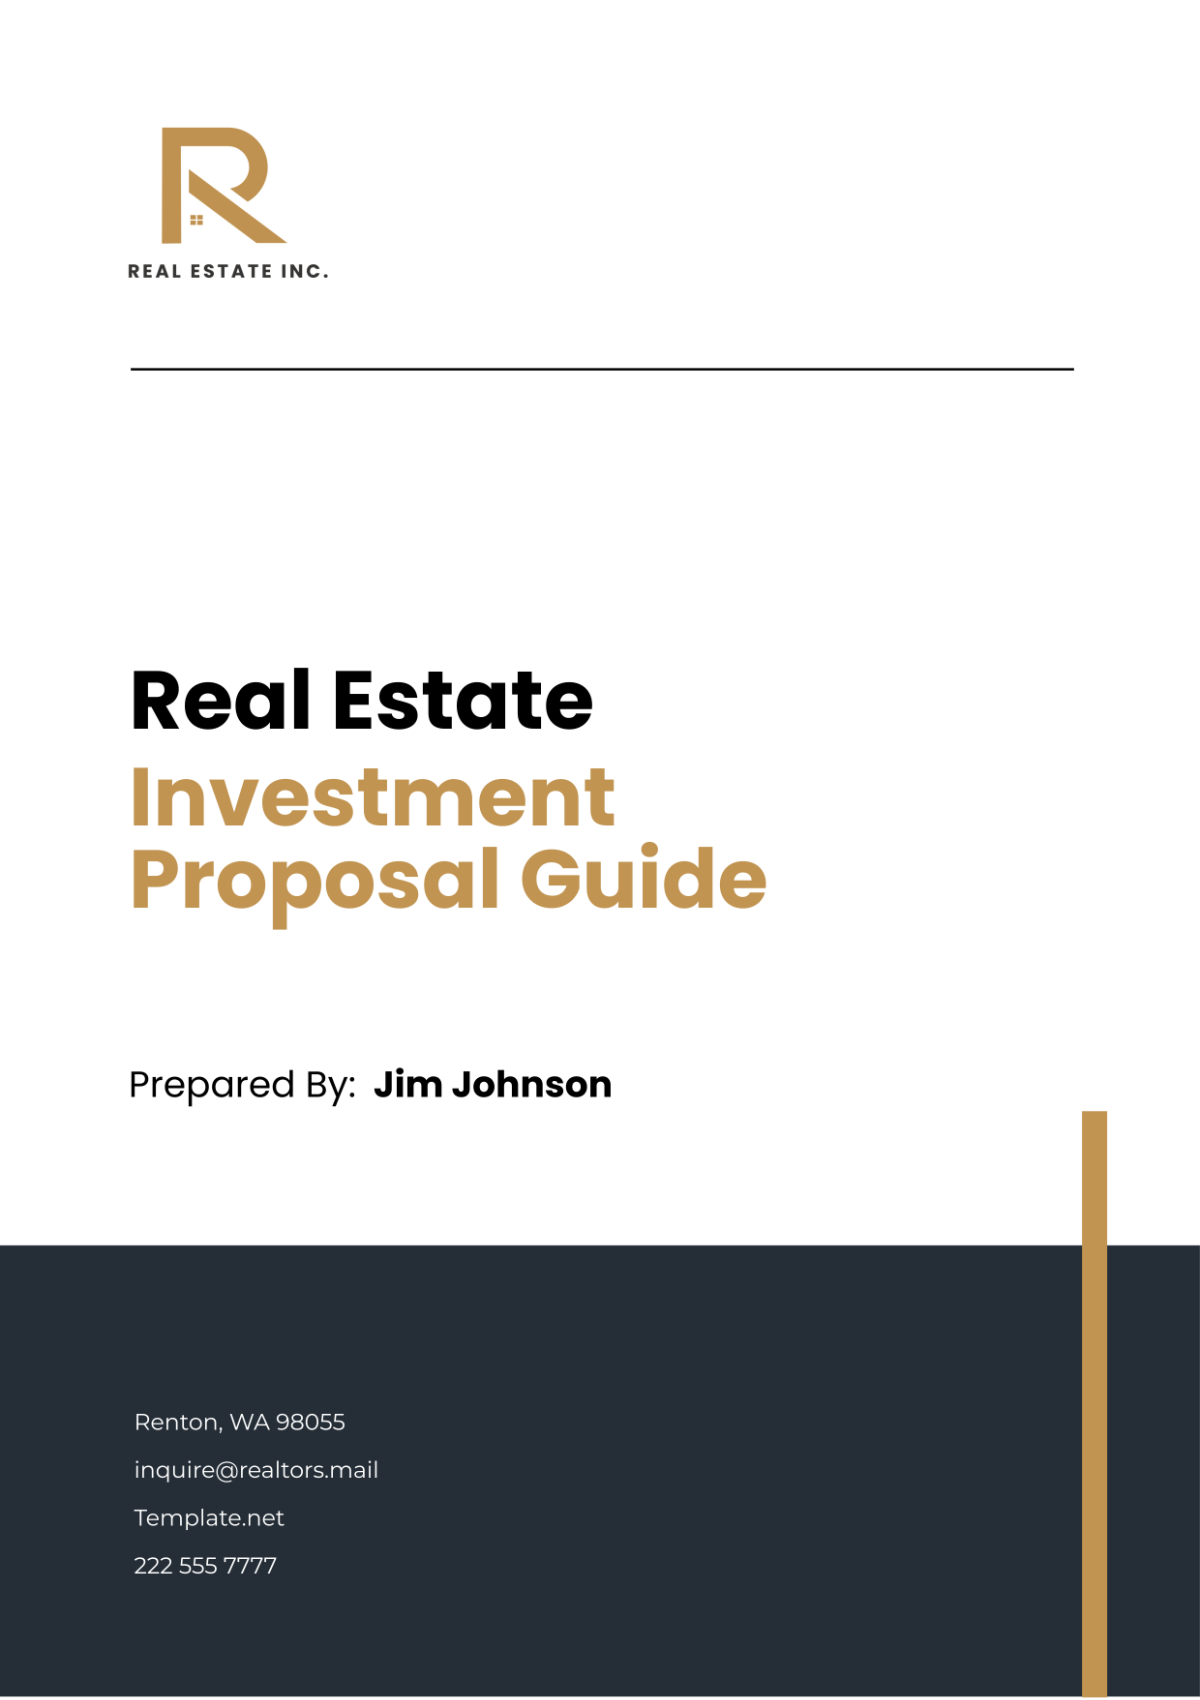 Real Estate Investment Proposal Guide Template